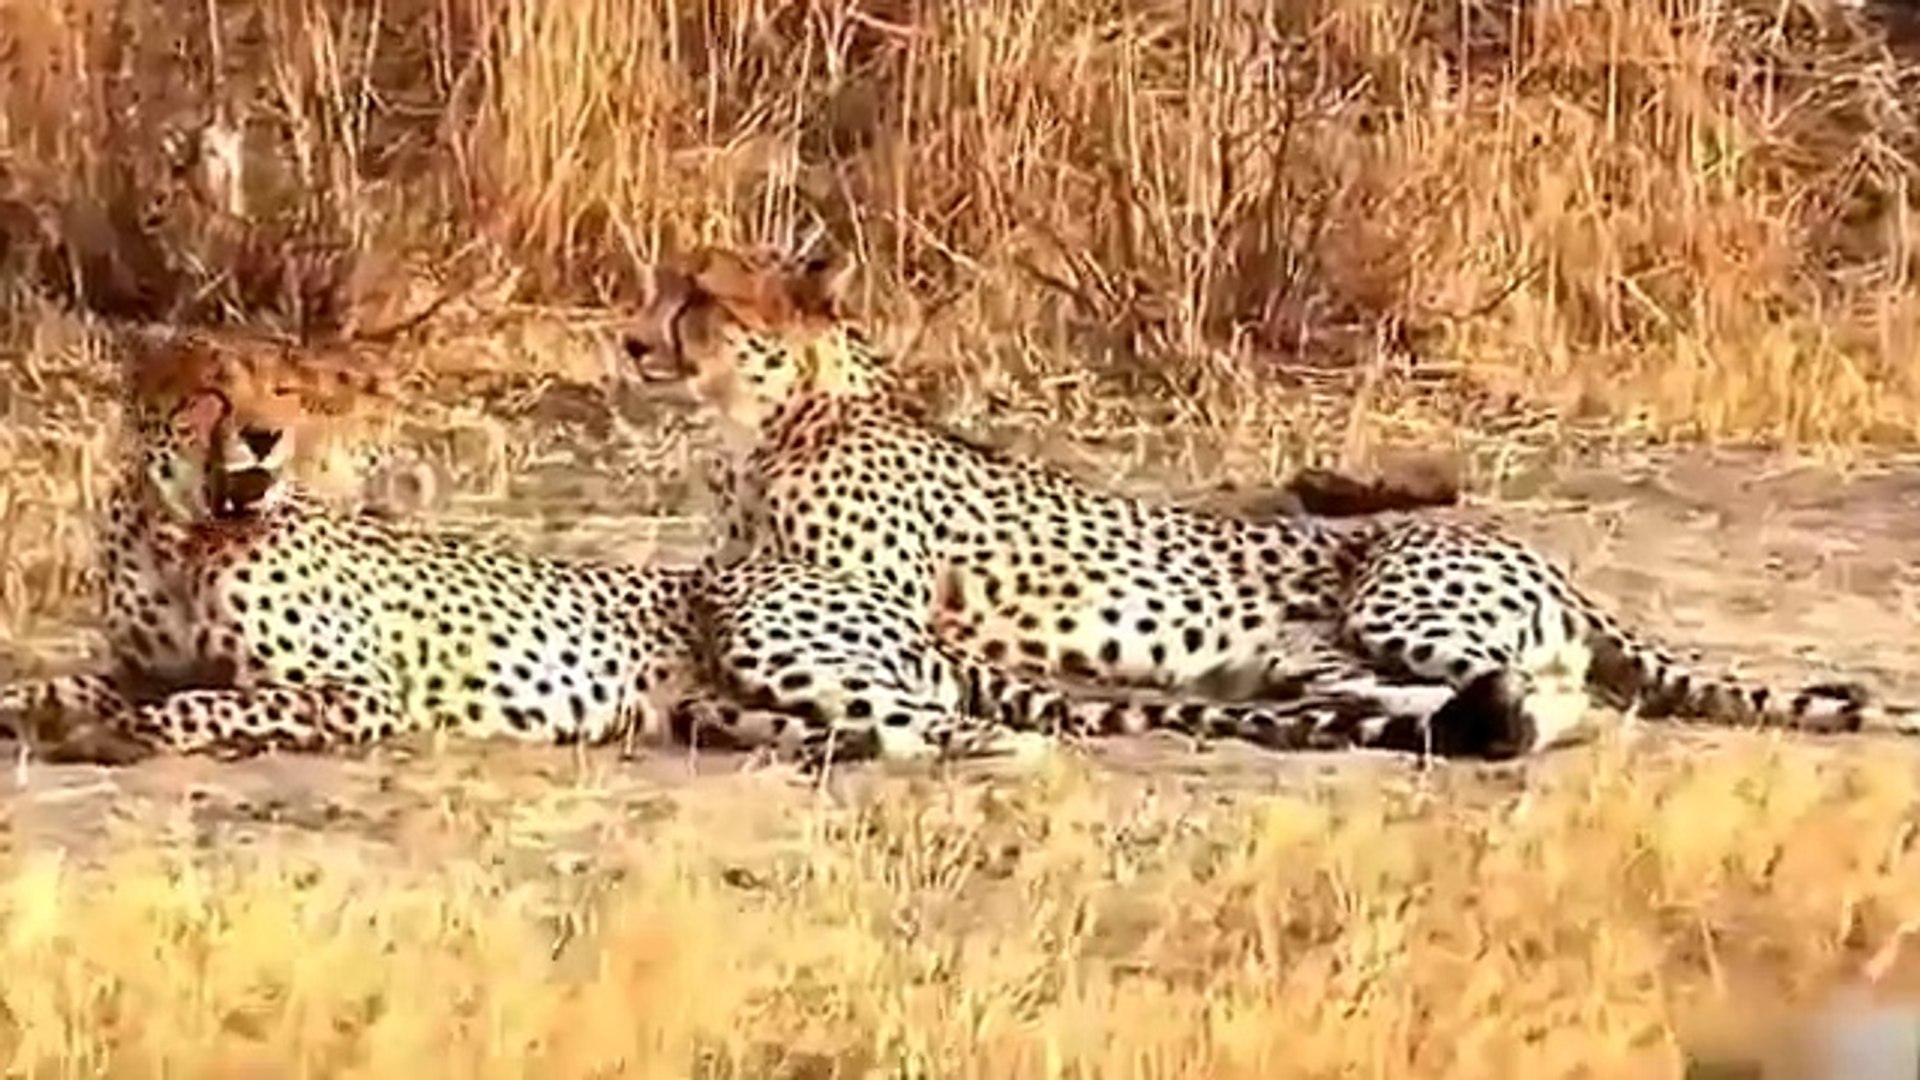 Wildebeests Family Saved You From Two Successful Cheetah - Cheetah vs Wildebeests